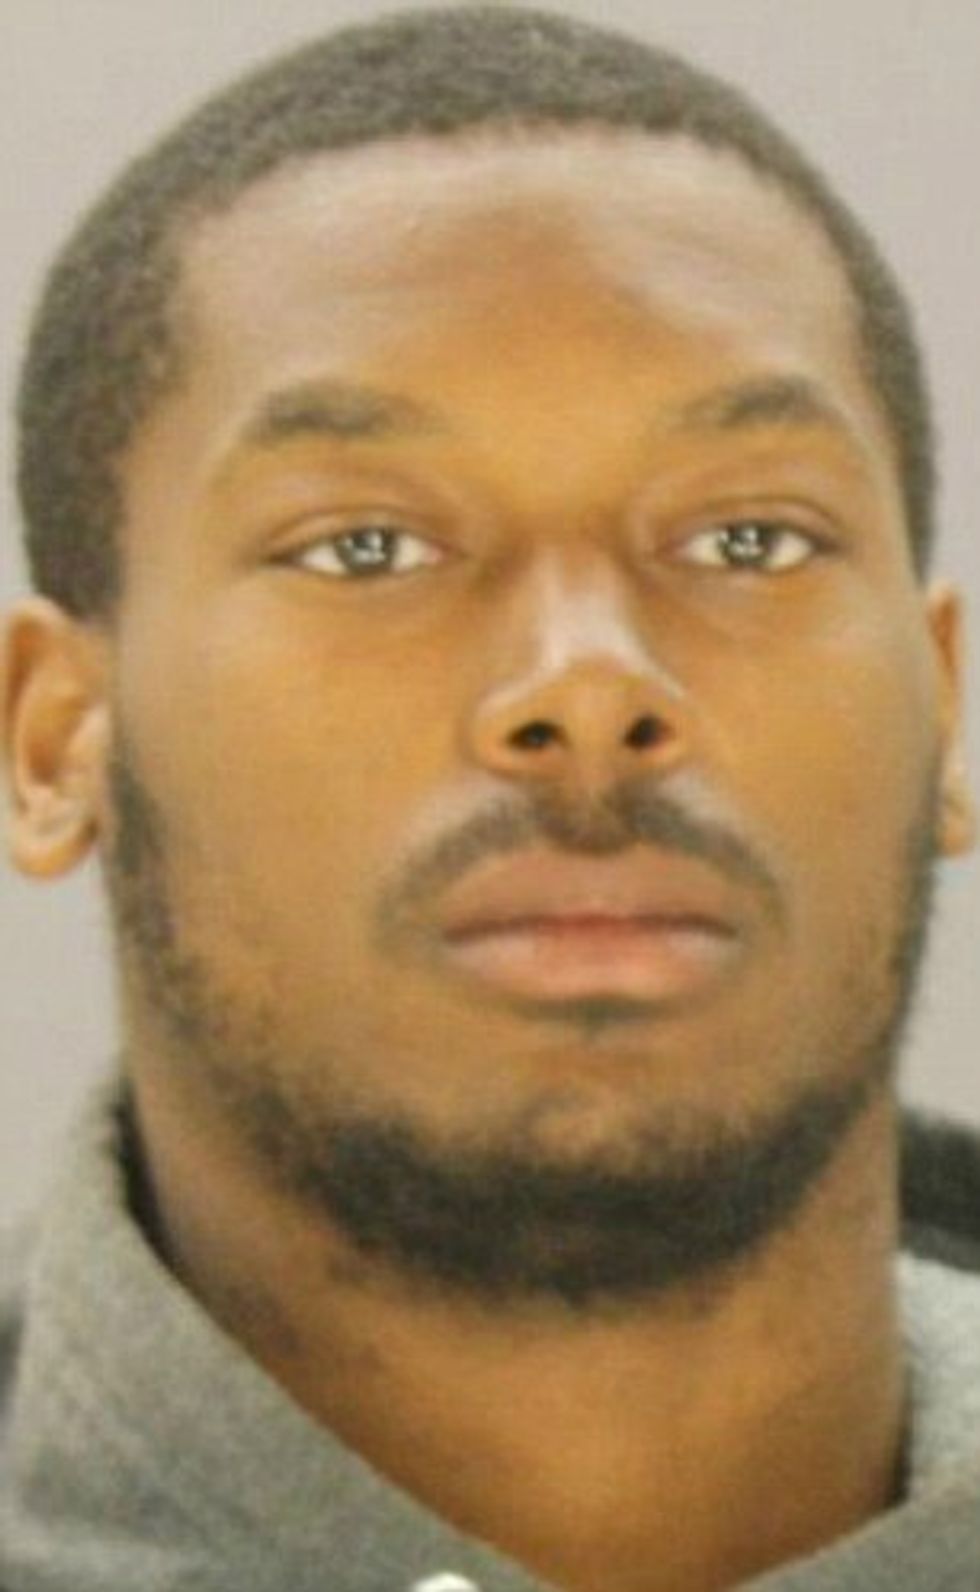 Former Texas A&M Football Star Admits He Was ‘Angry’ So He Picked a Random Jogger and Hacked Him to Death With a Machete: Police